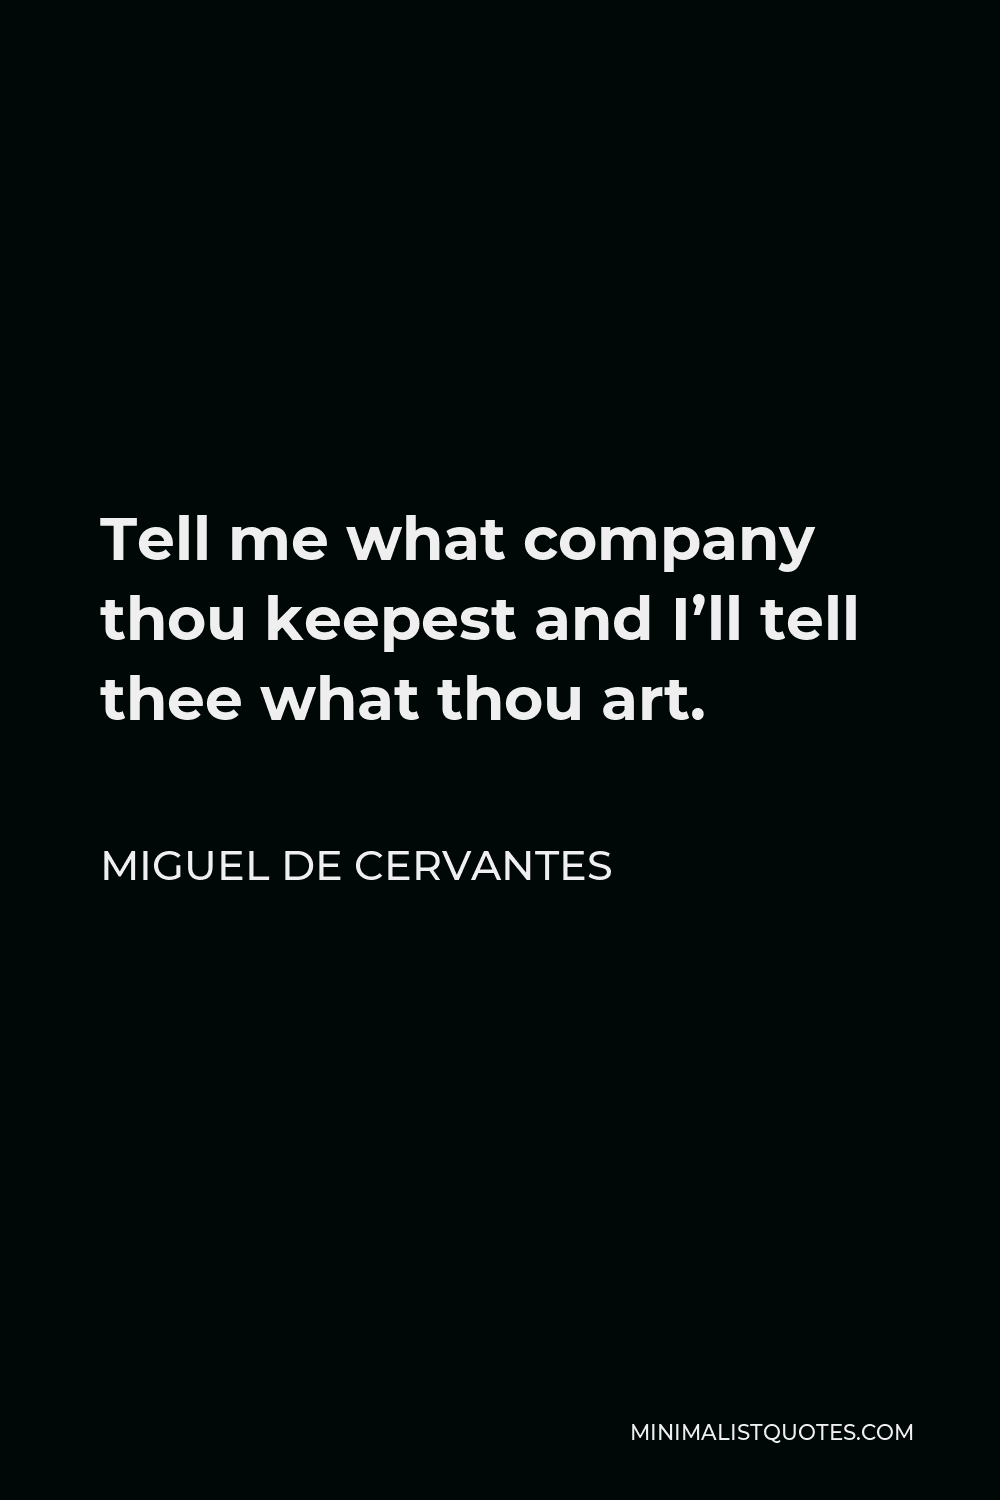 Miguel de Cervantes Quote - Tell me what company thou keepest and I’ll tell thee what thou art.